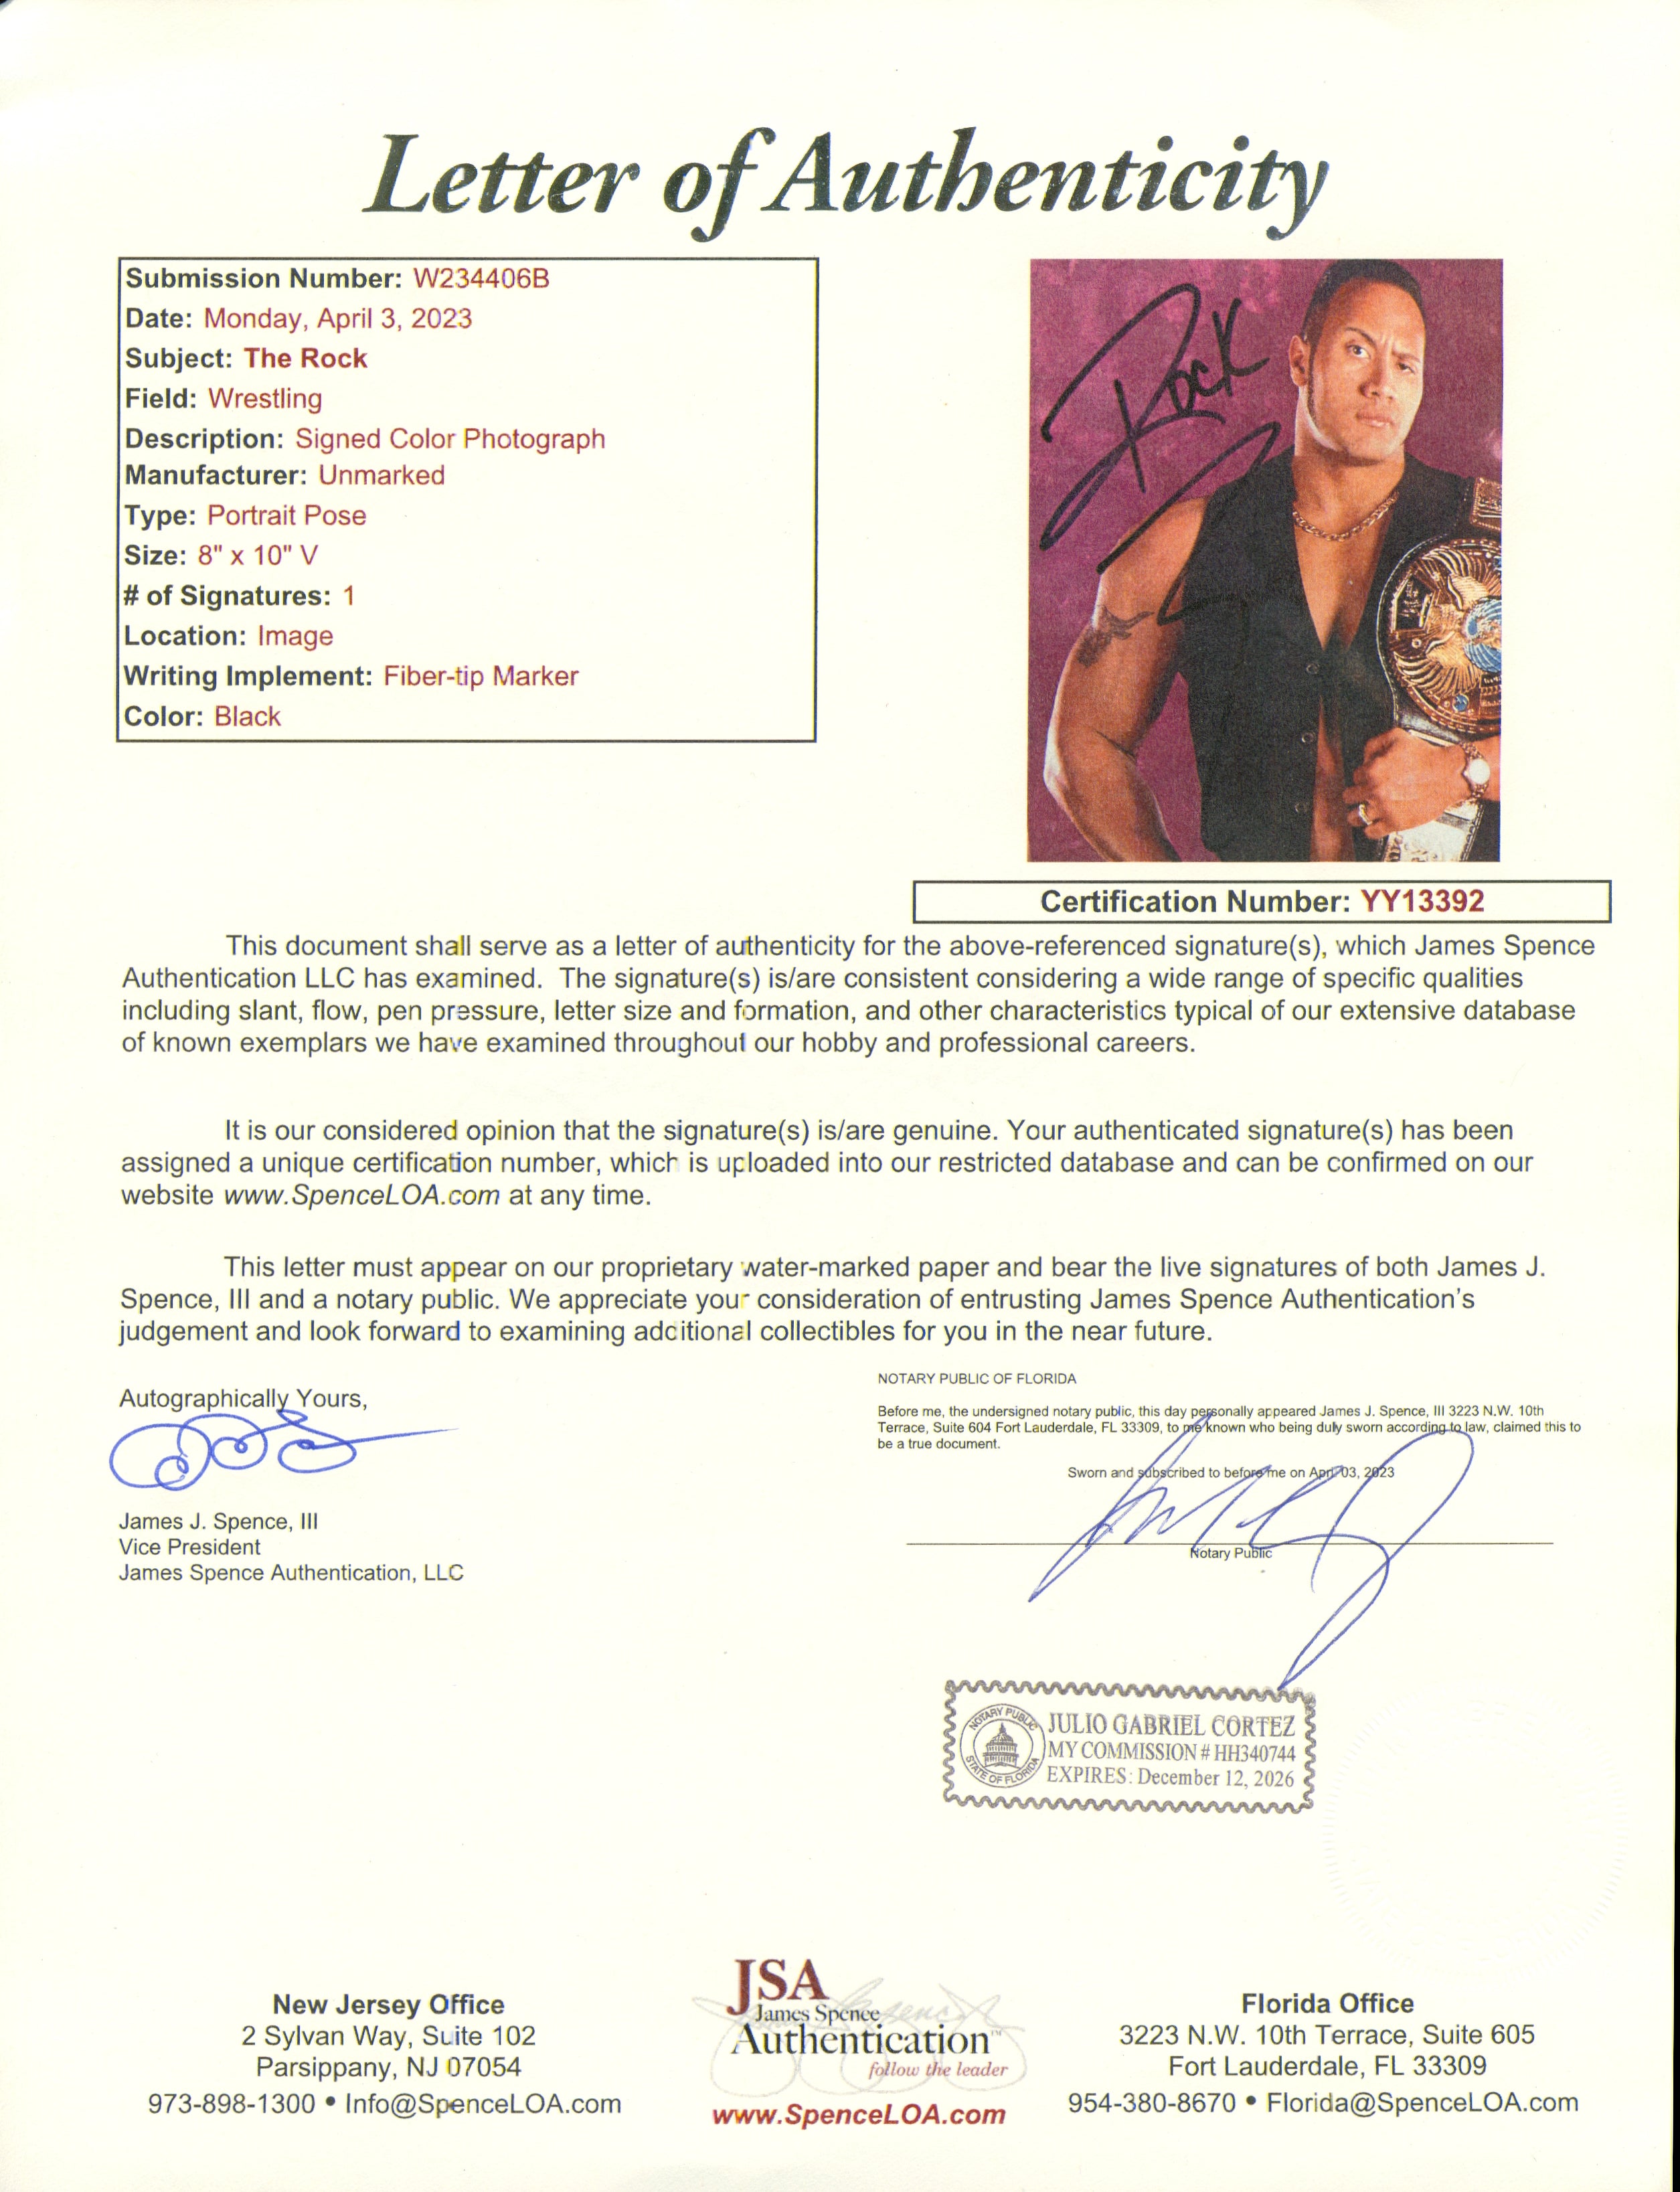 WWE THE ROCK SIGNED THE PEOPLE'S EYEBROW 8X10 PHOTO